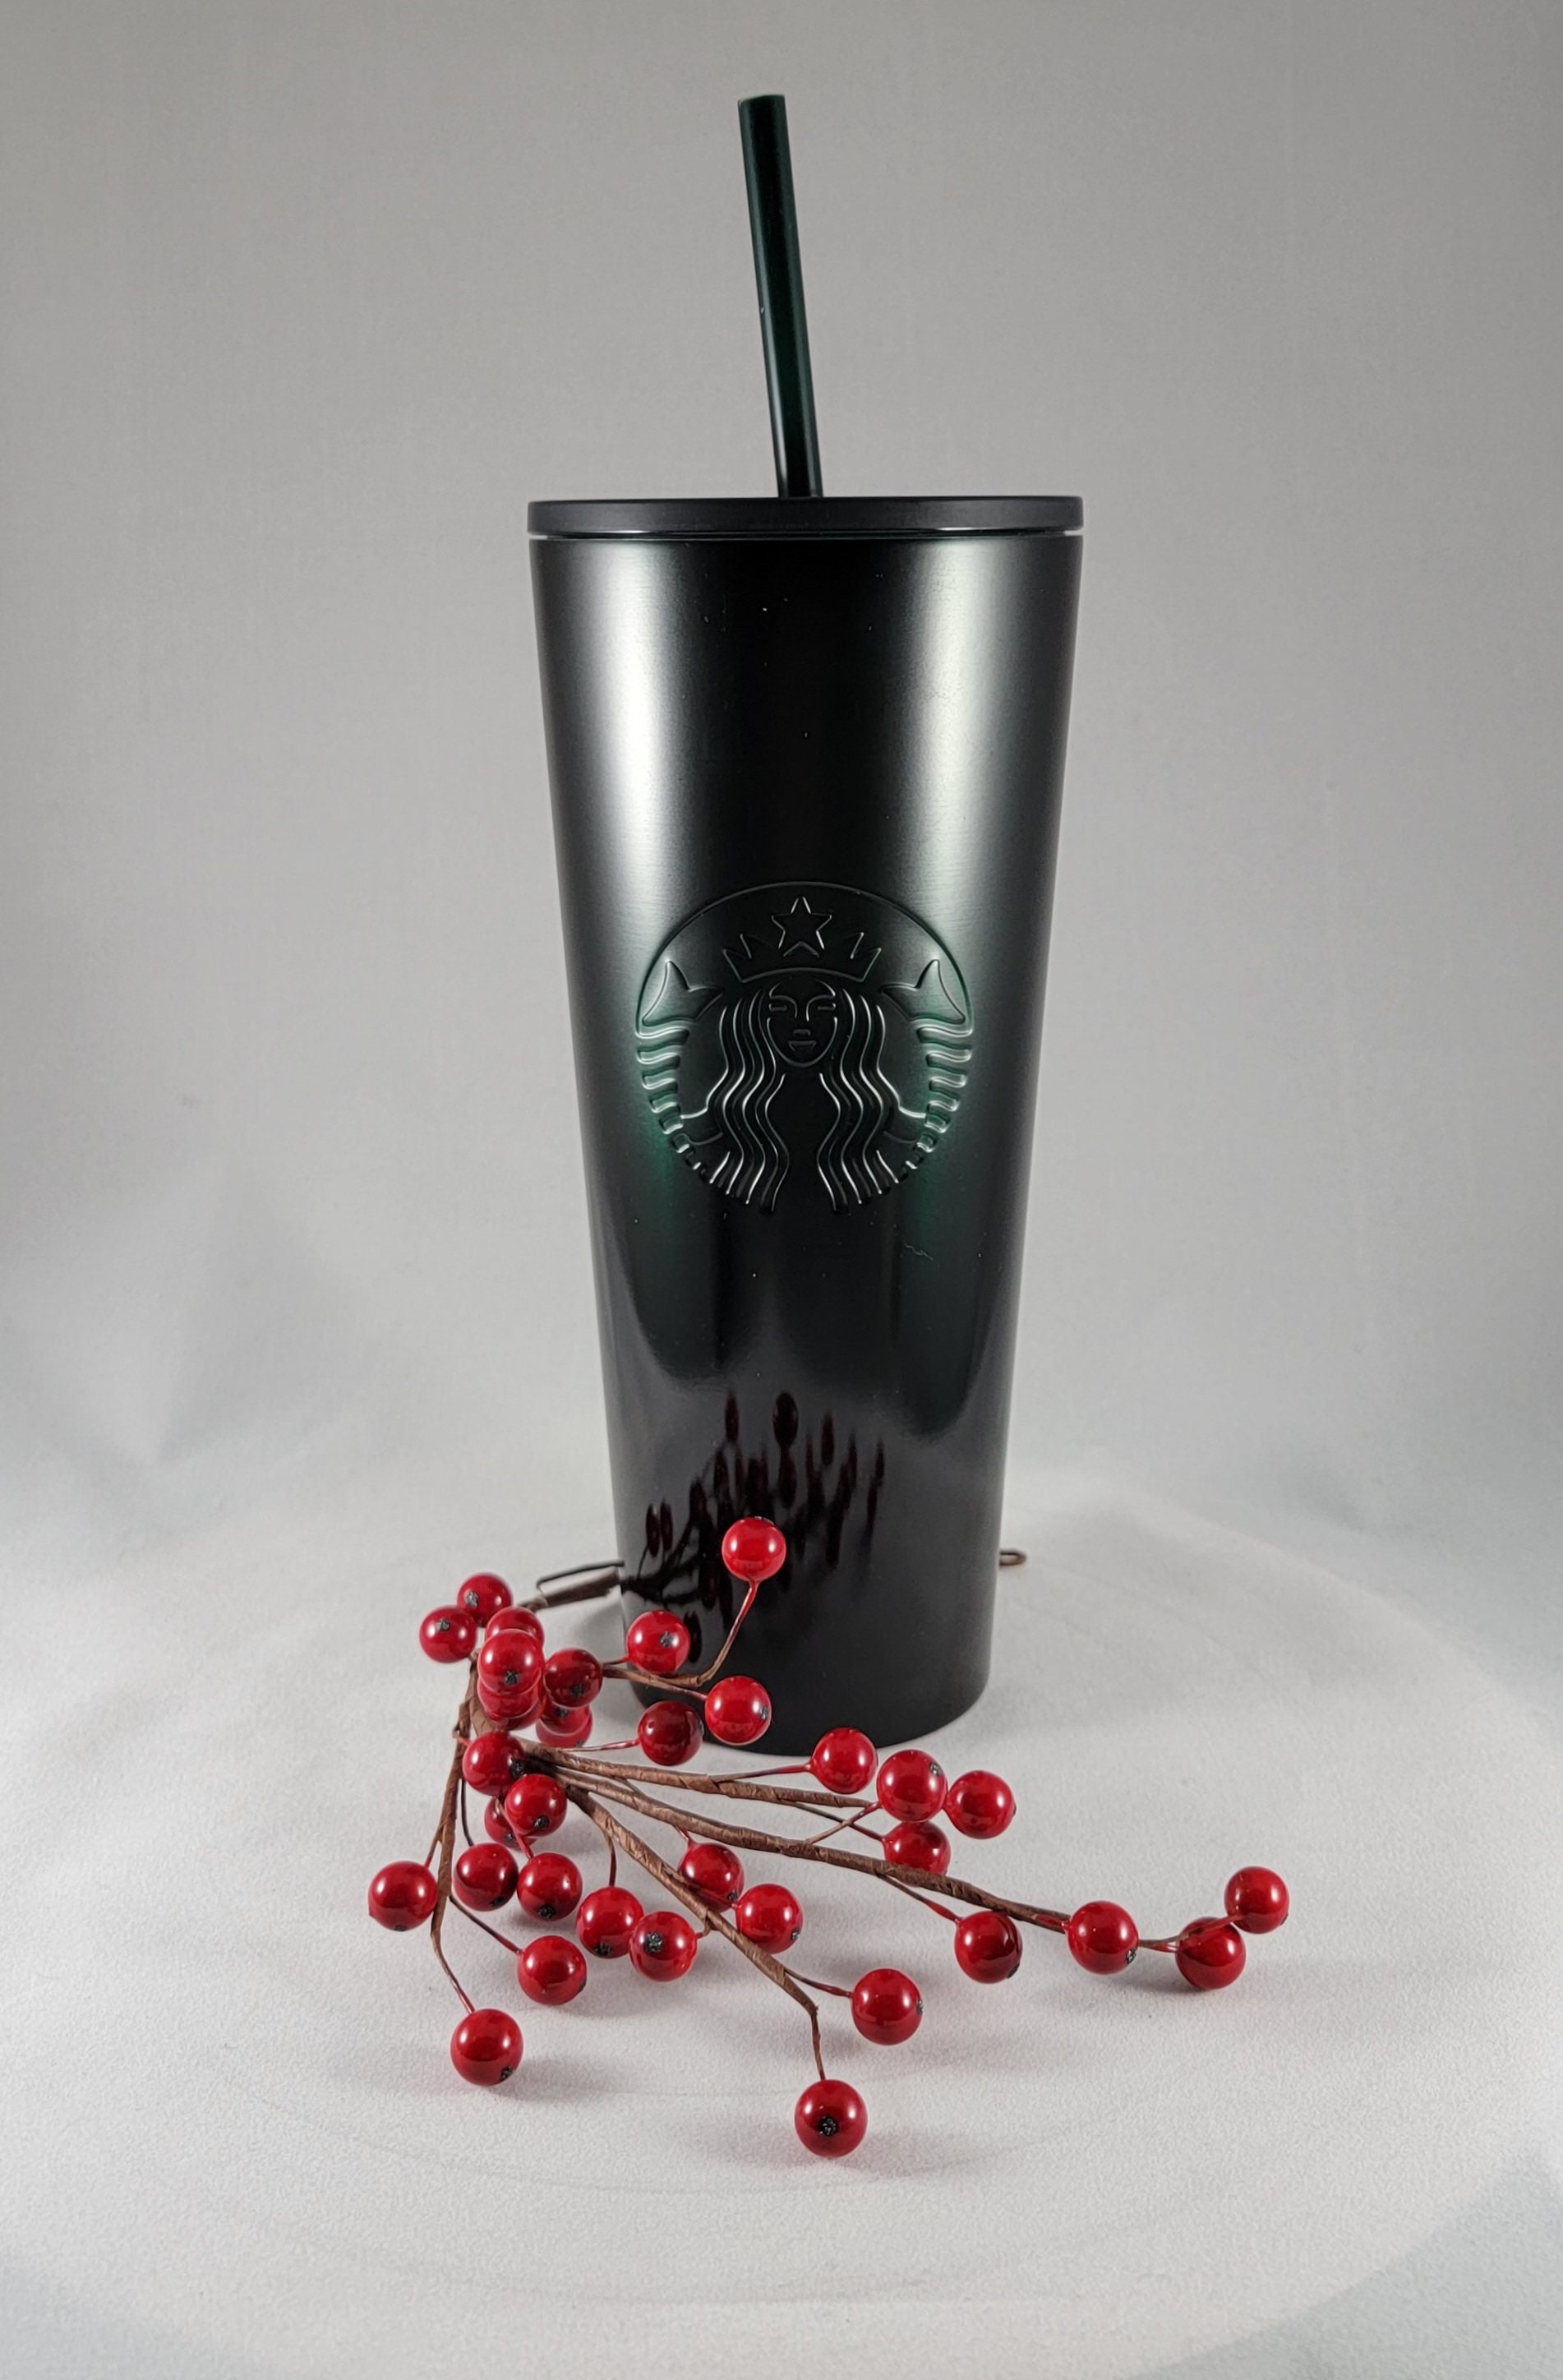 Starbucks Limited Edition SS Stanley White and Red Tumbler 591ml Straw Cup